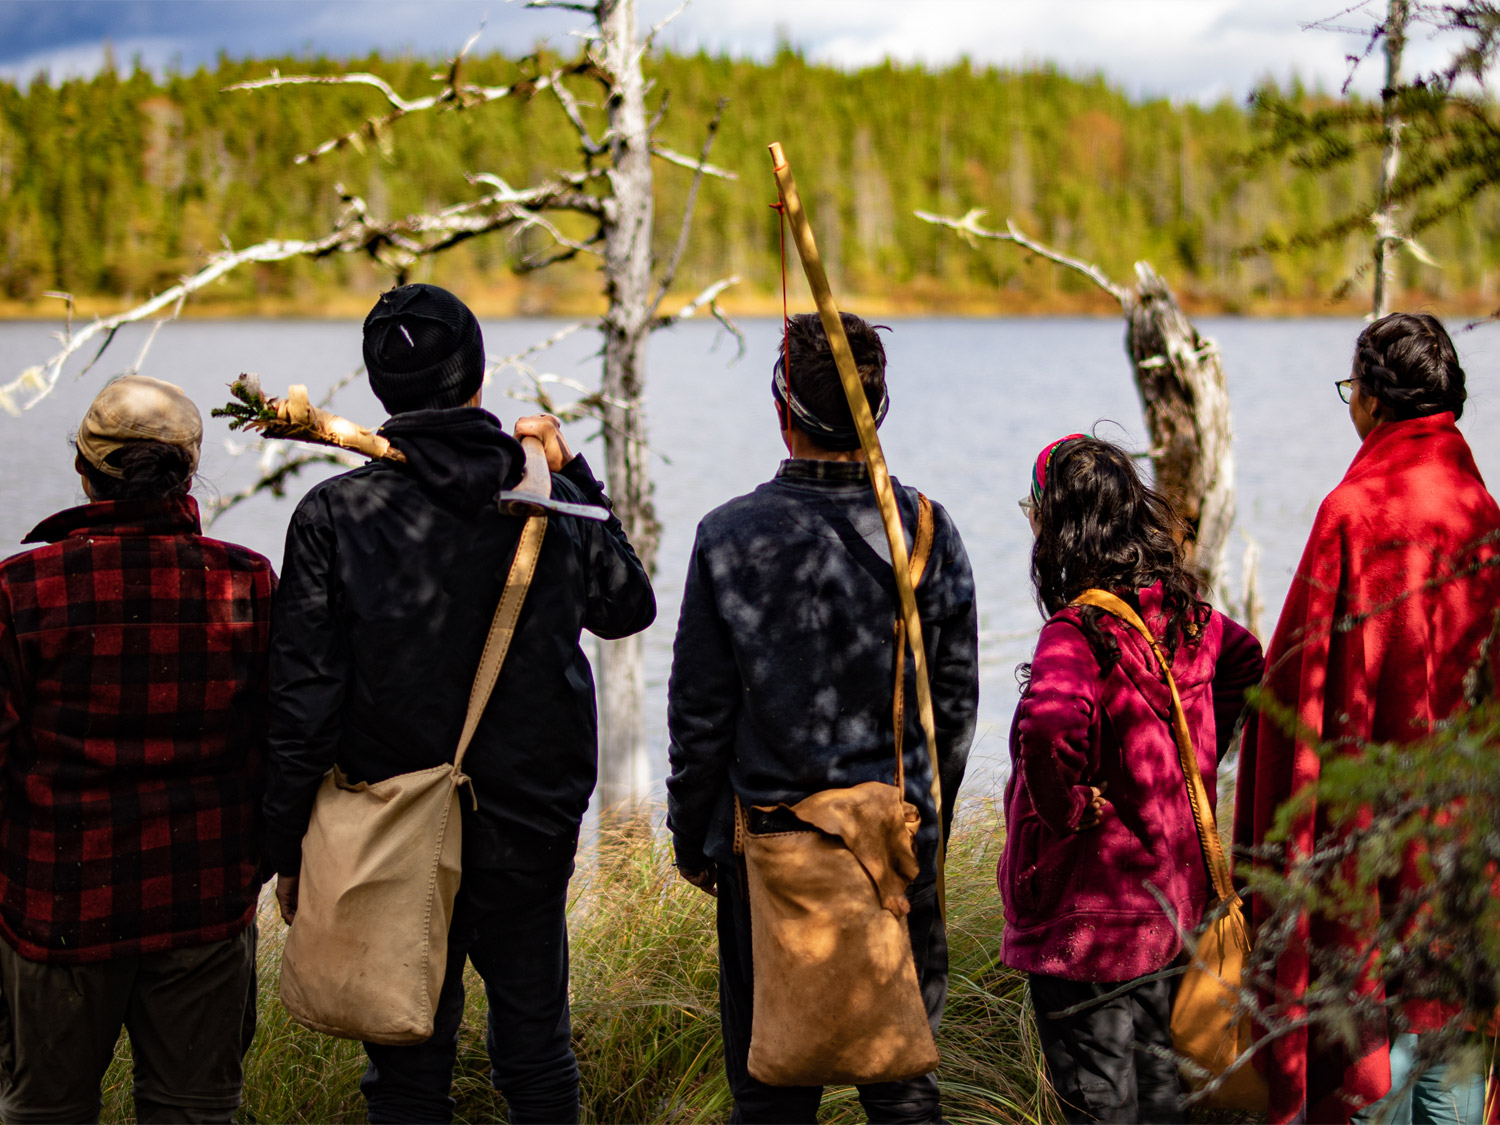 A group of indigenous people overlooking a lake in Ontario.